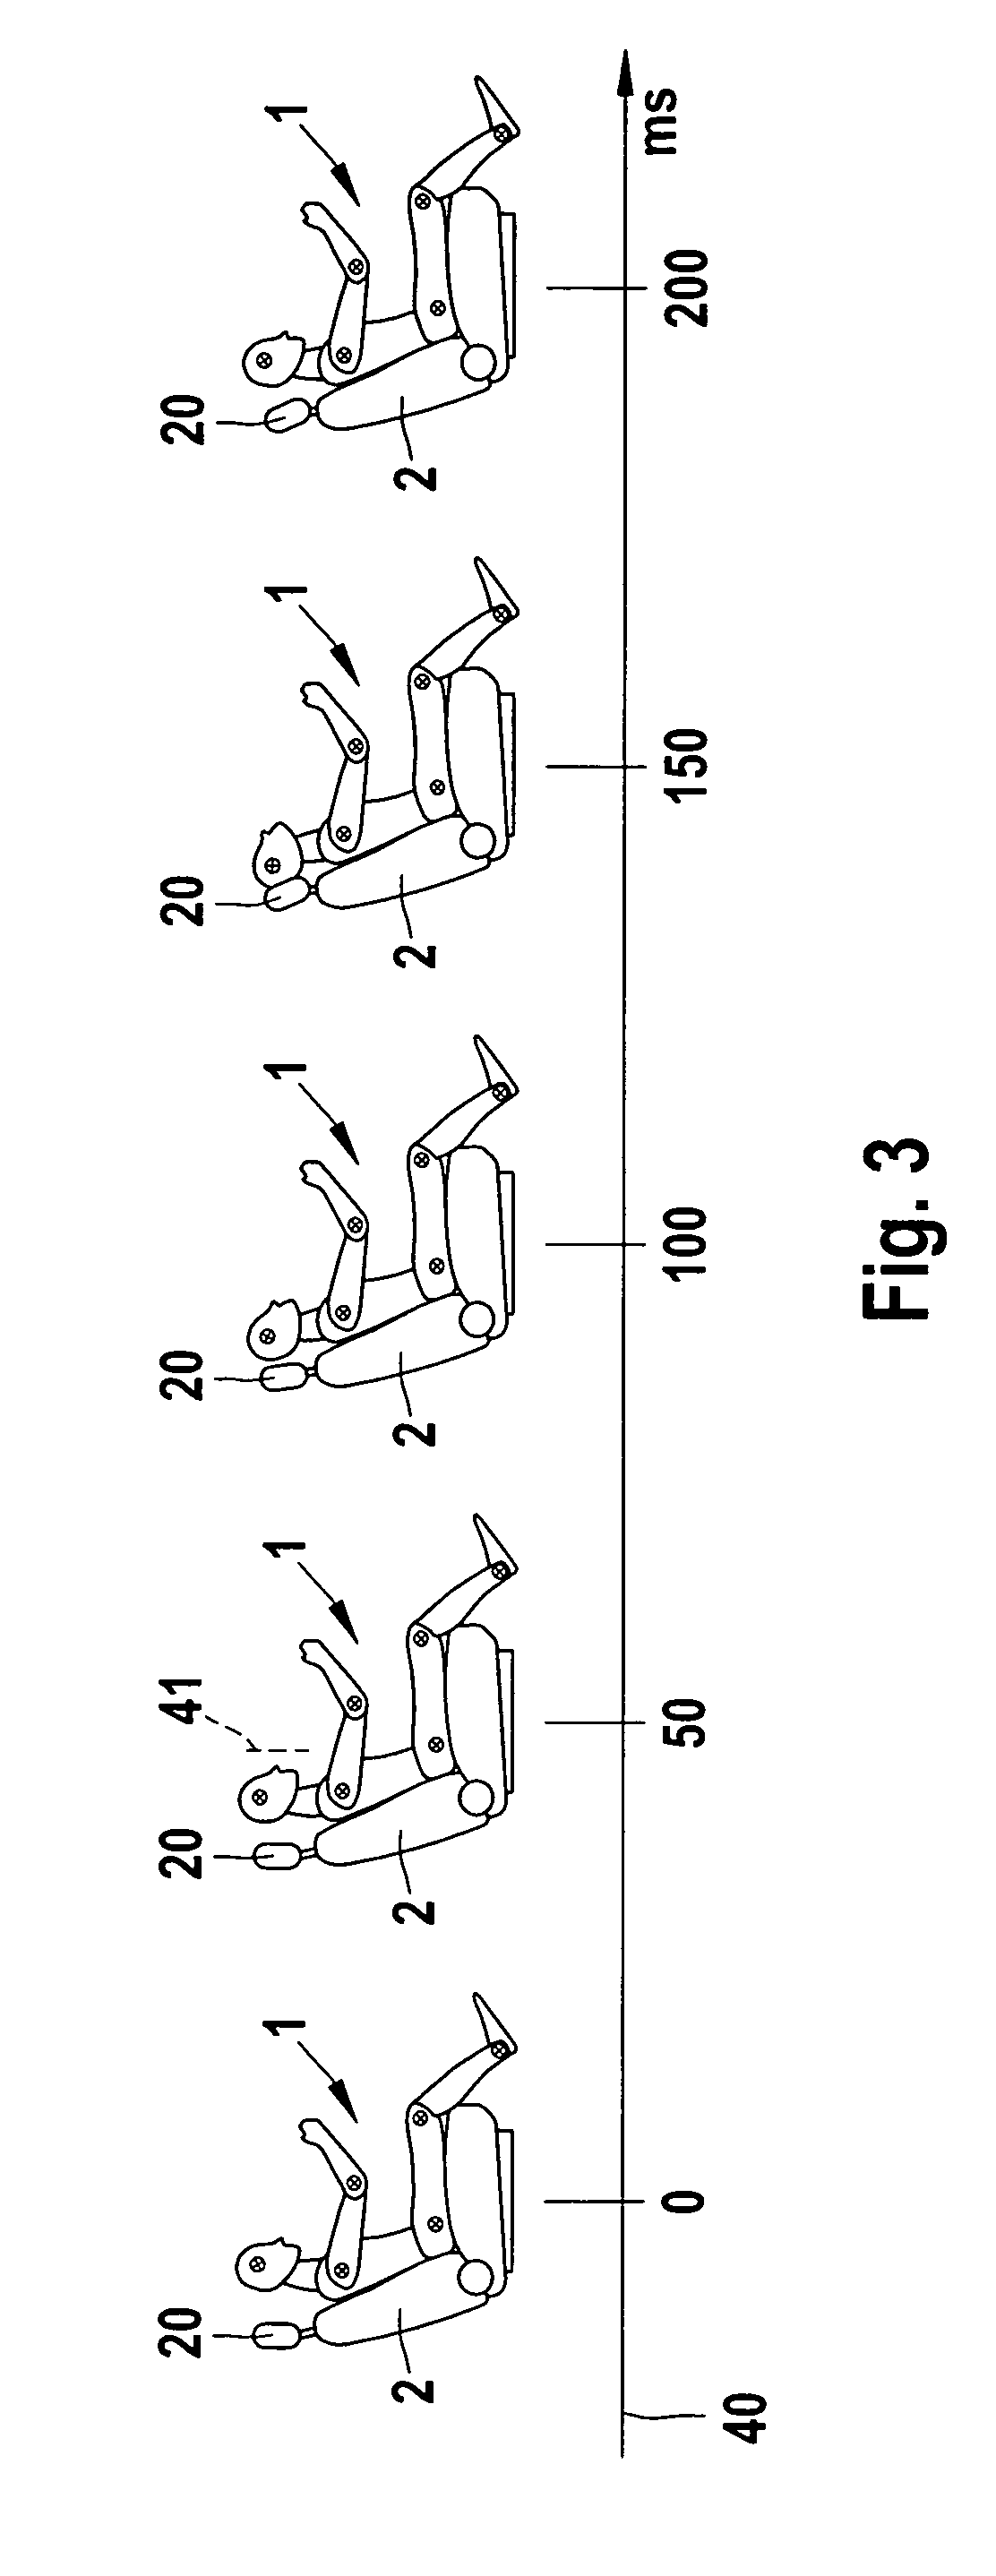 Passenger-protection device in a vehicle